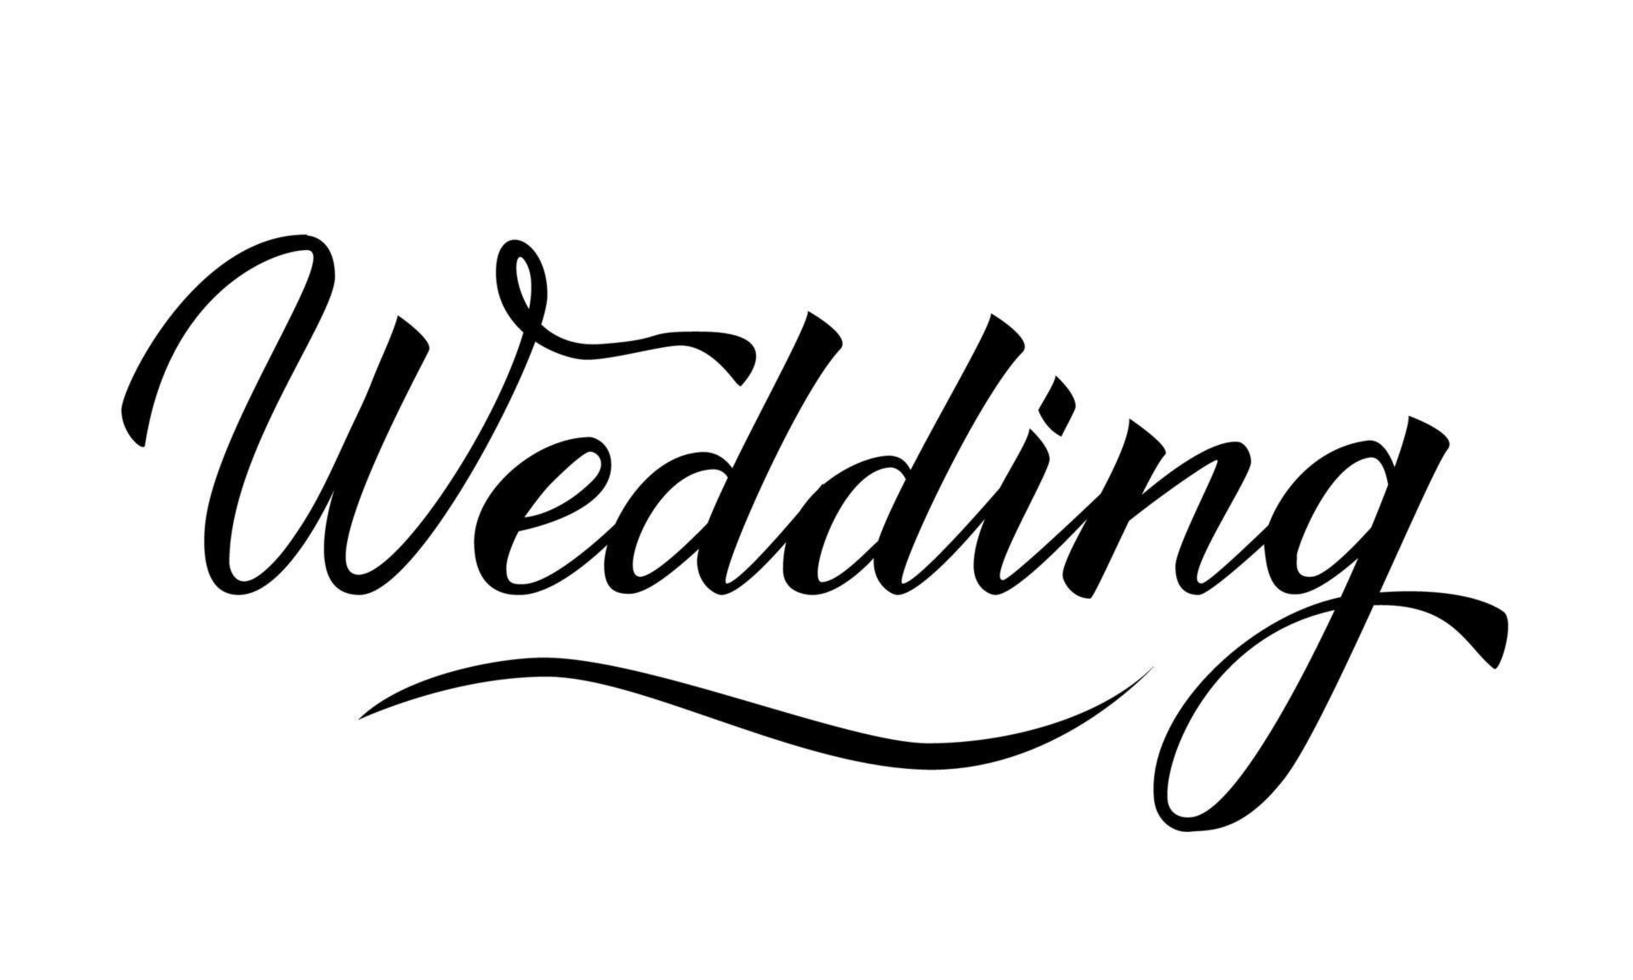 Writing Wedding isolated on white. Hand written with brush calligraphy lettering. vector